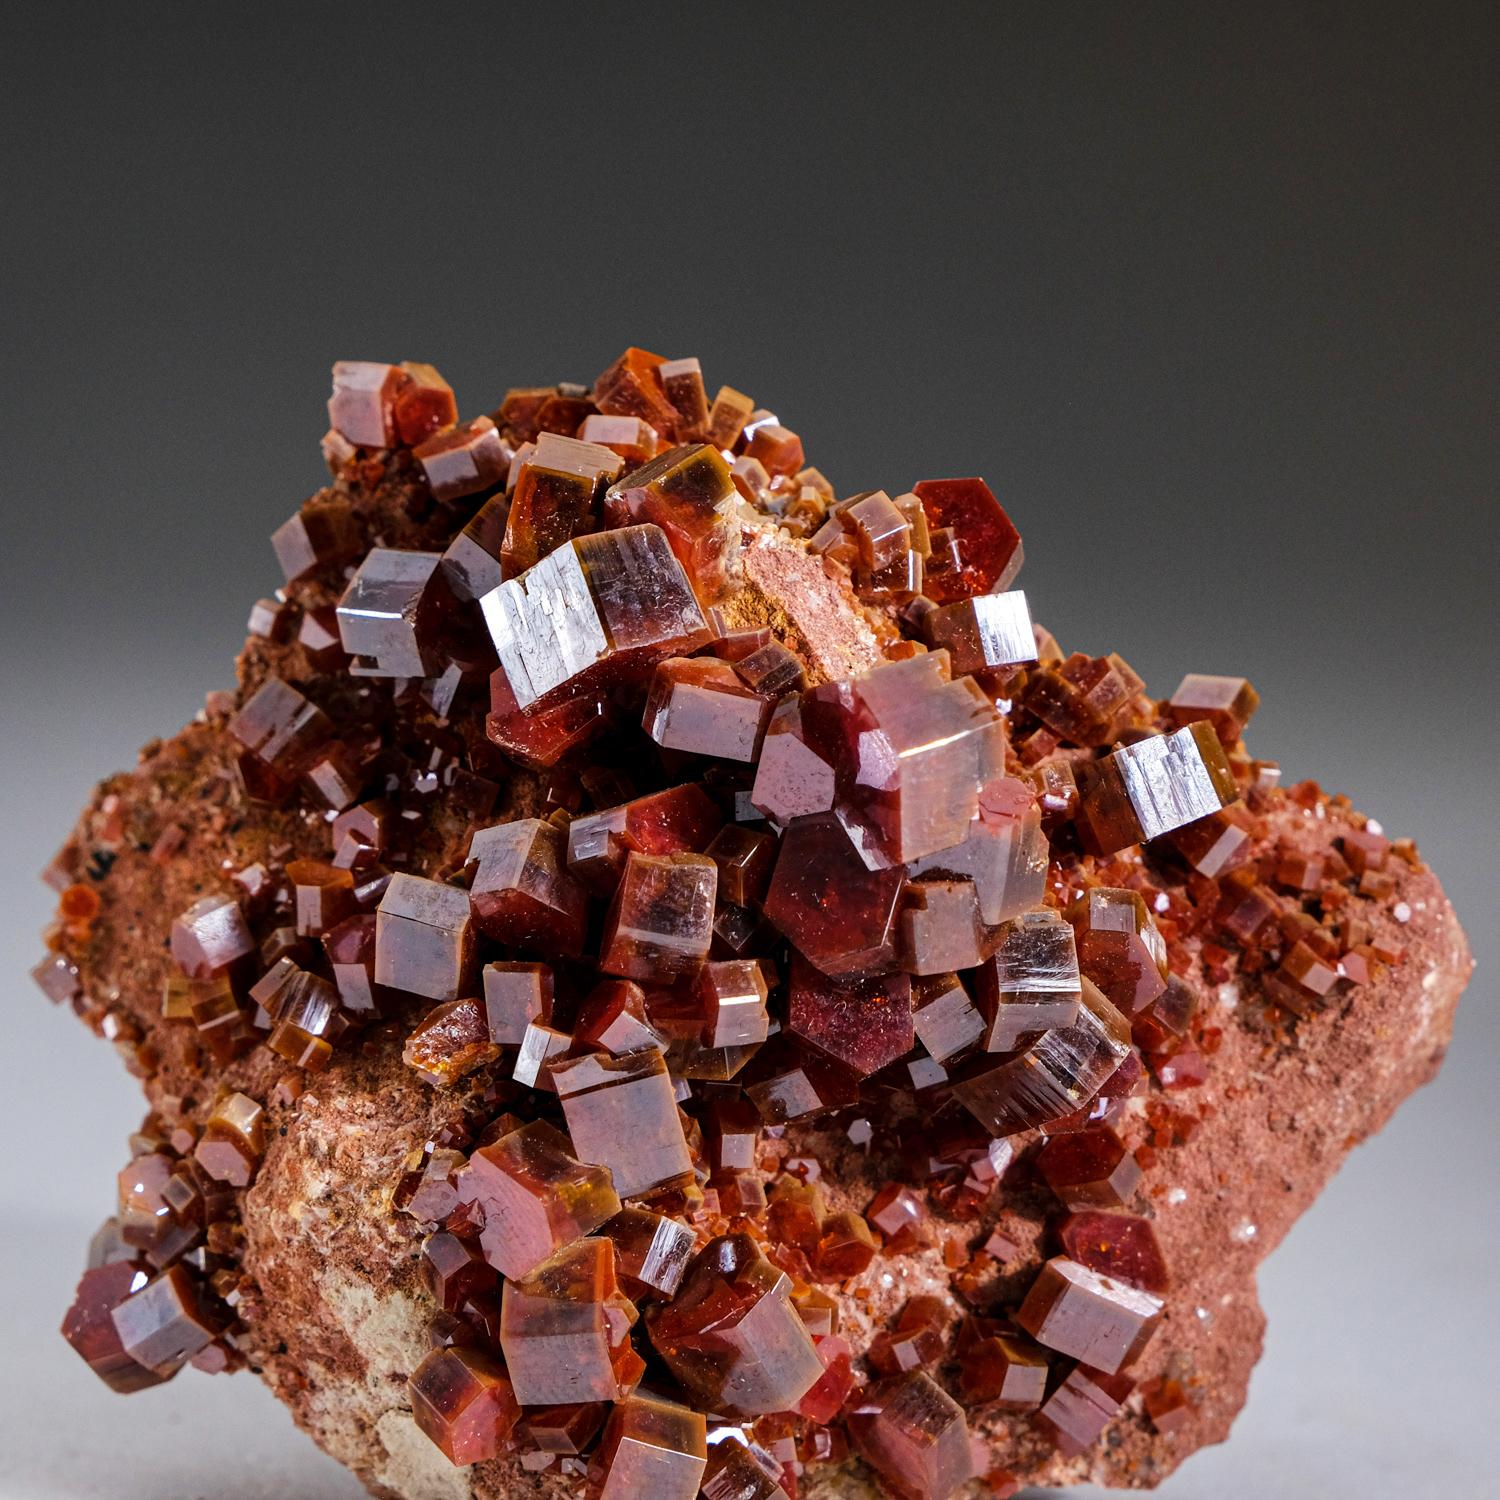 Contemporary Genuine Vanadinite Crystal Cluster on Matrix from Morocco (183.4 grams) For Sale